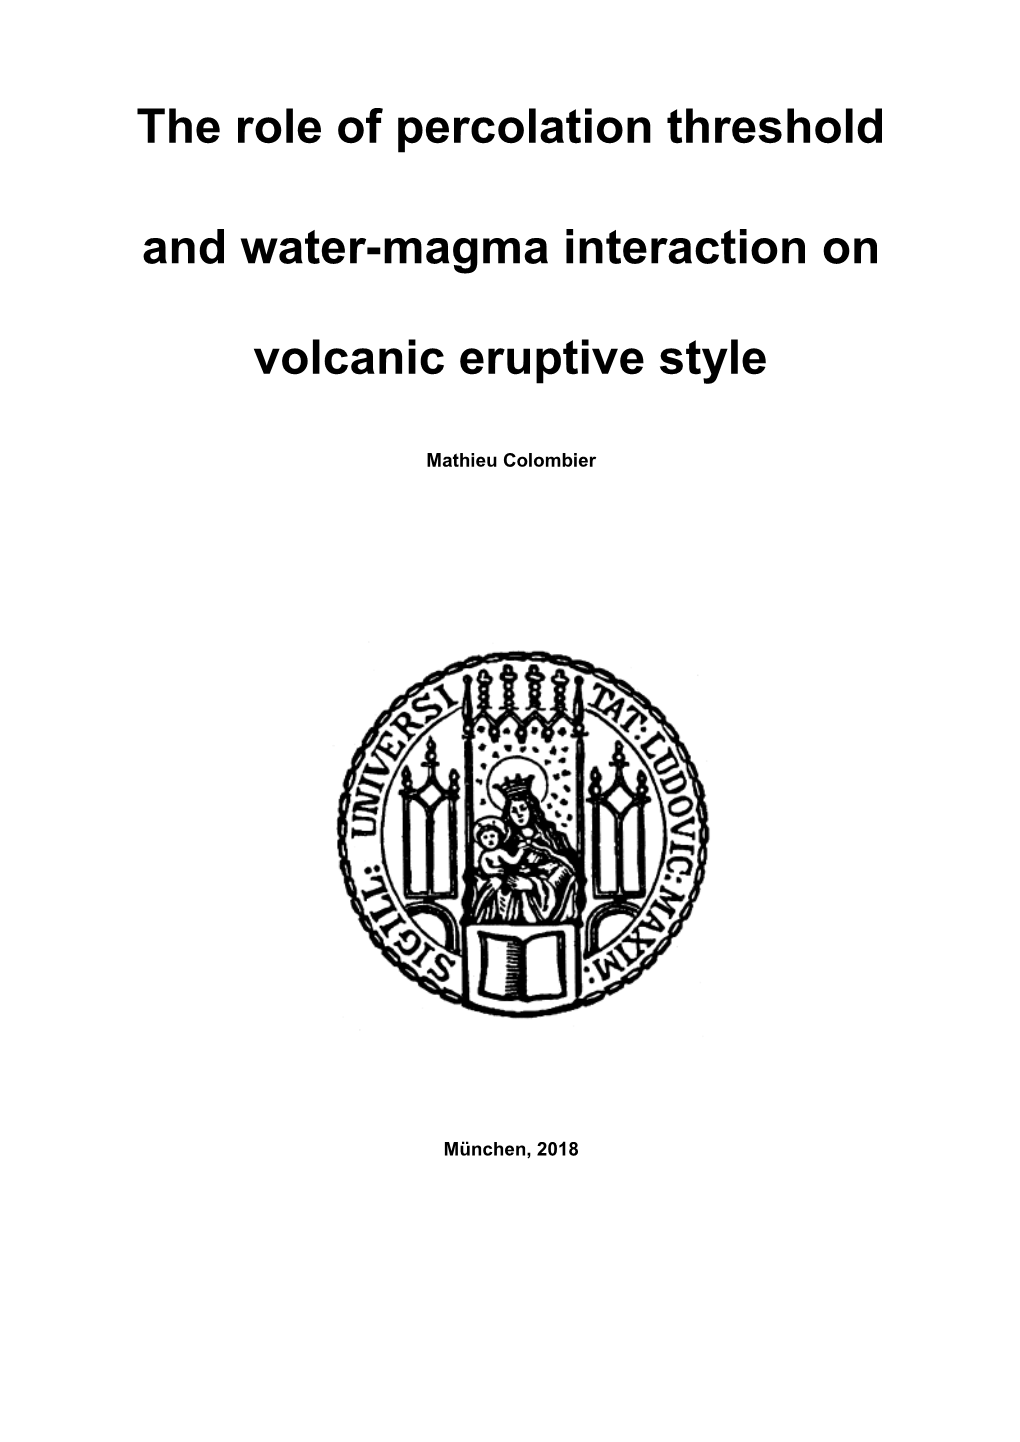 The Role of Percolation Threshold and Water-Magma Interaction On